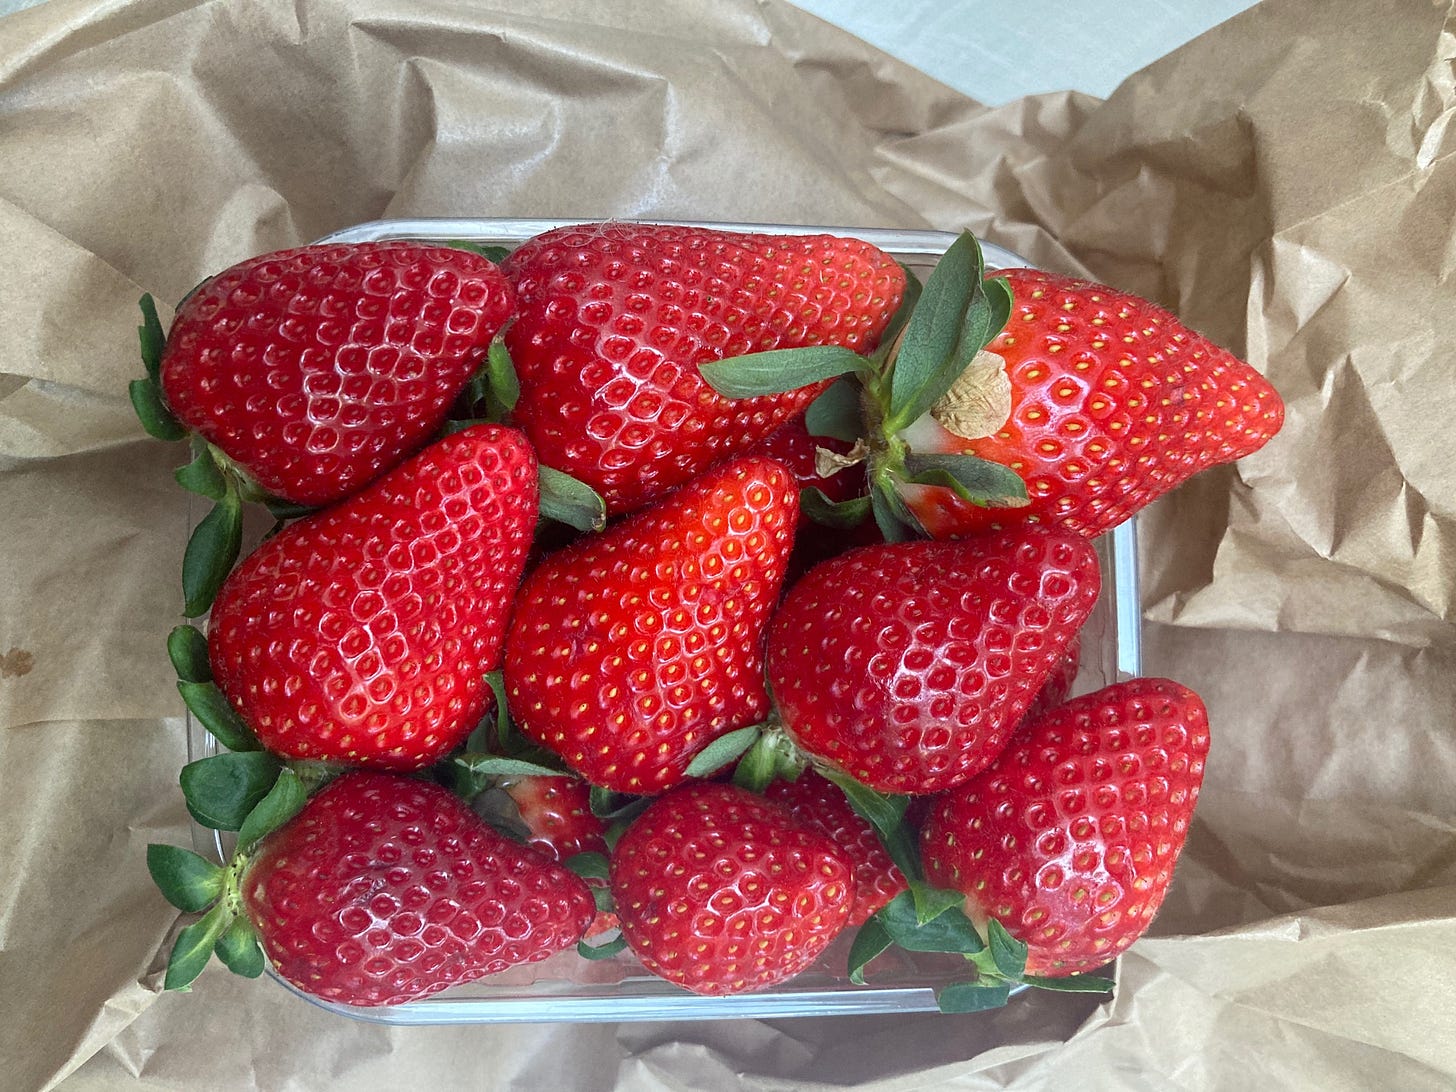 A punnet of strawberries